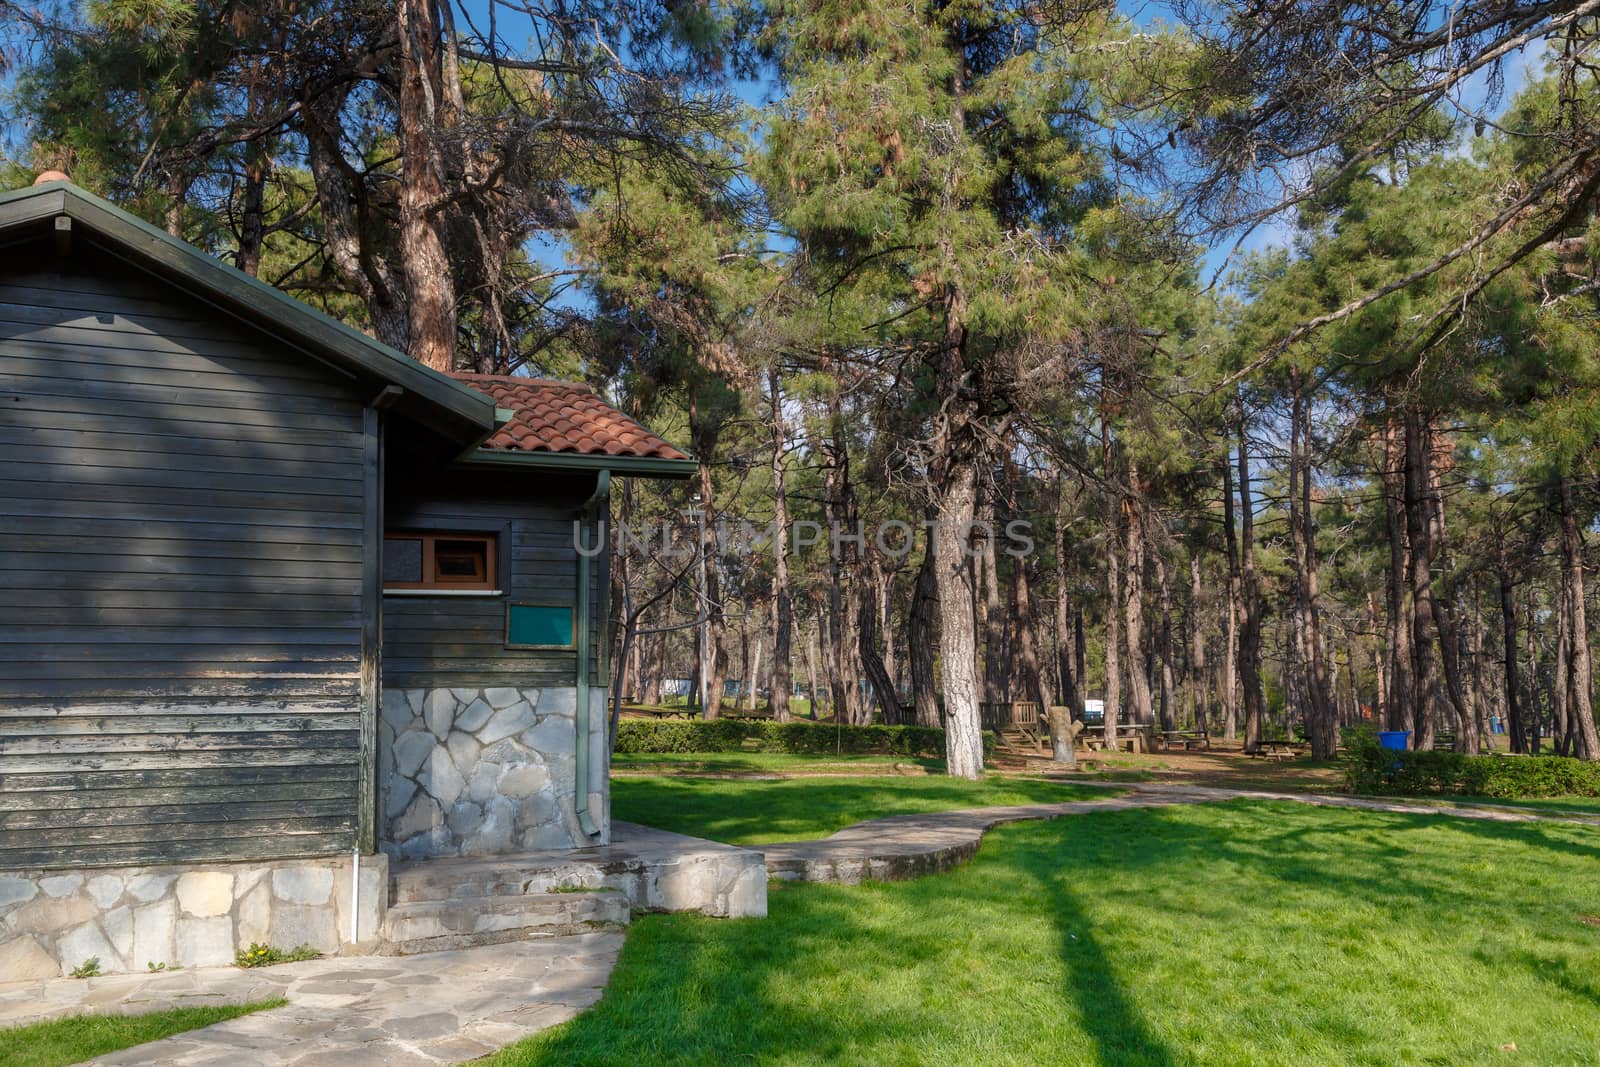 View of a big park with pine trees, meadow area and wooden house around.